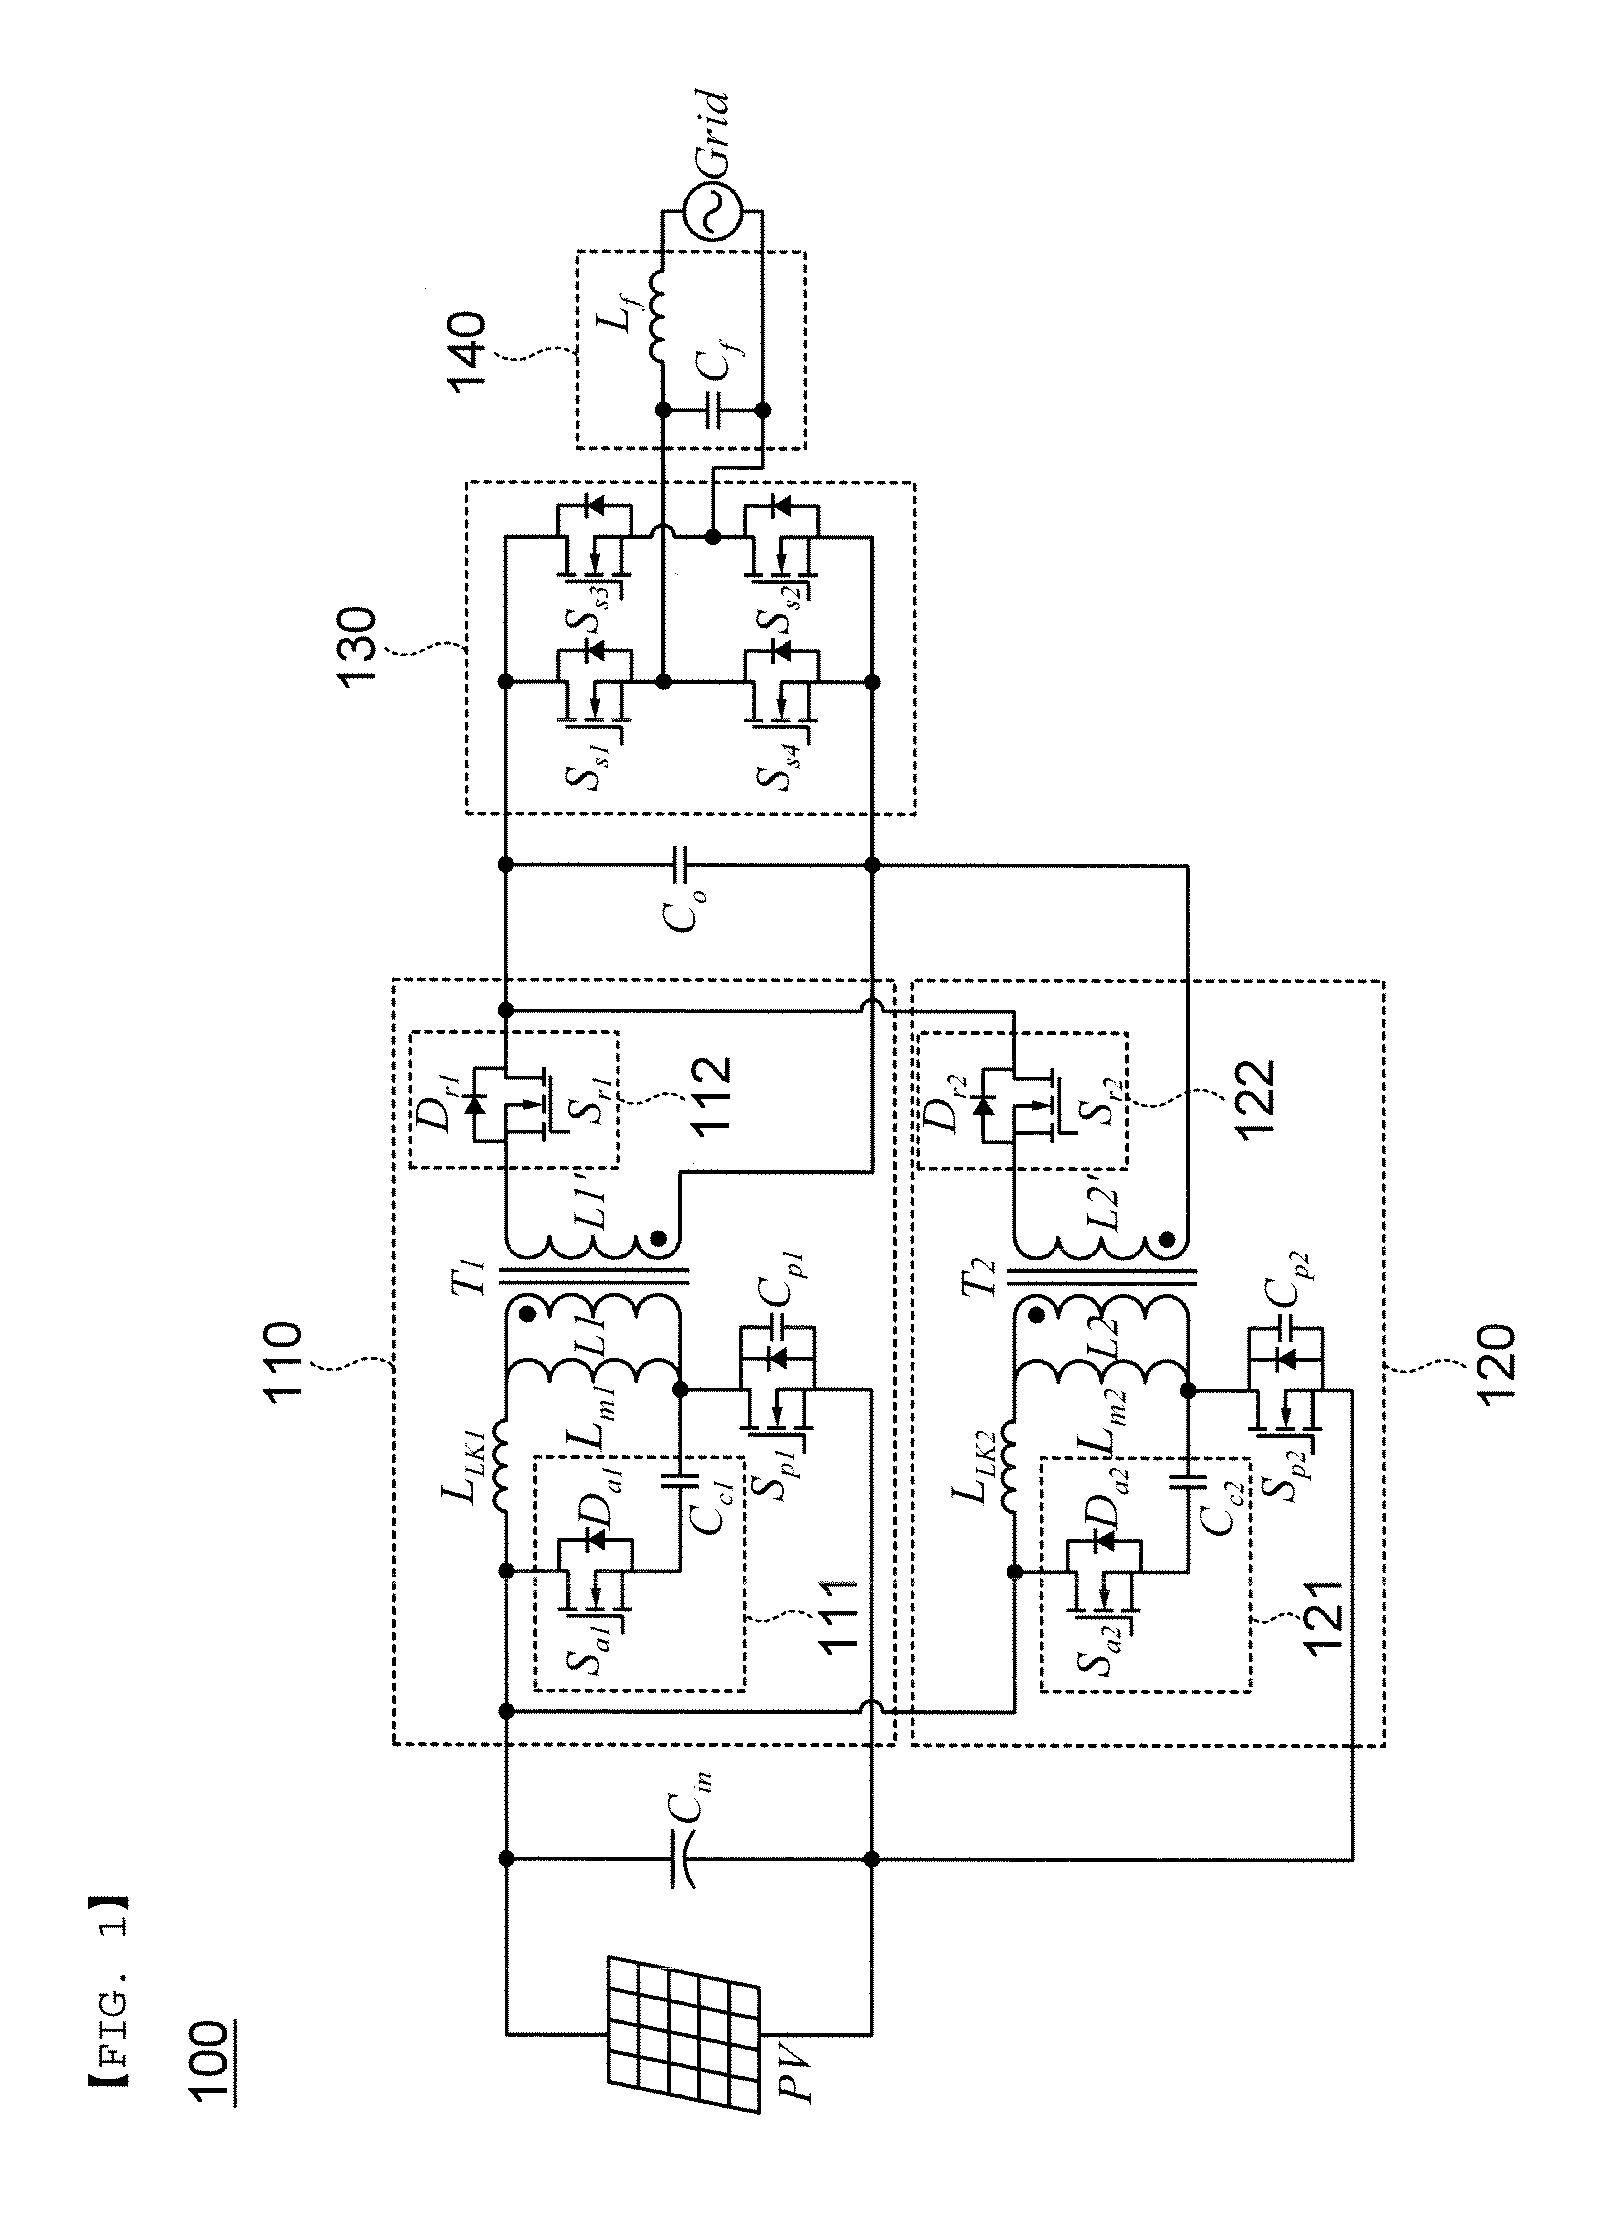 Converter, method for controlling the same, and inverter